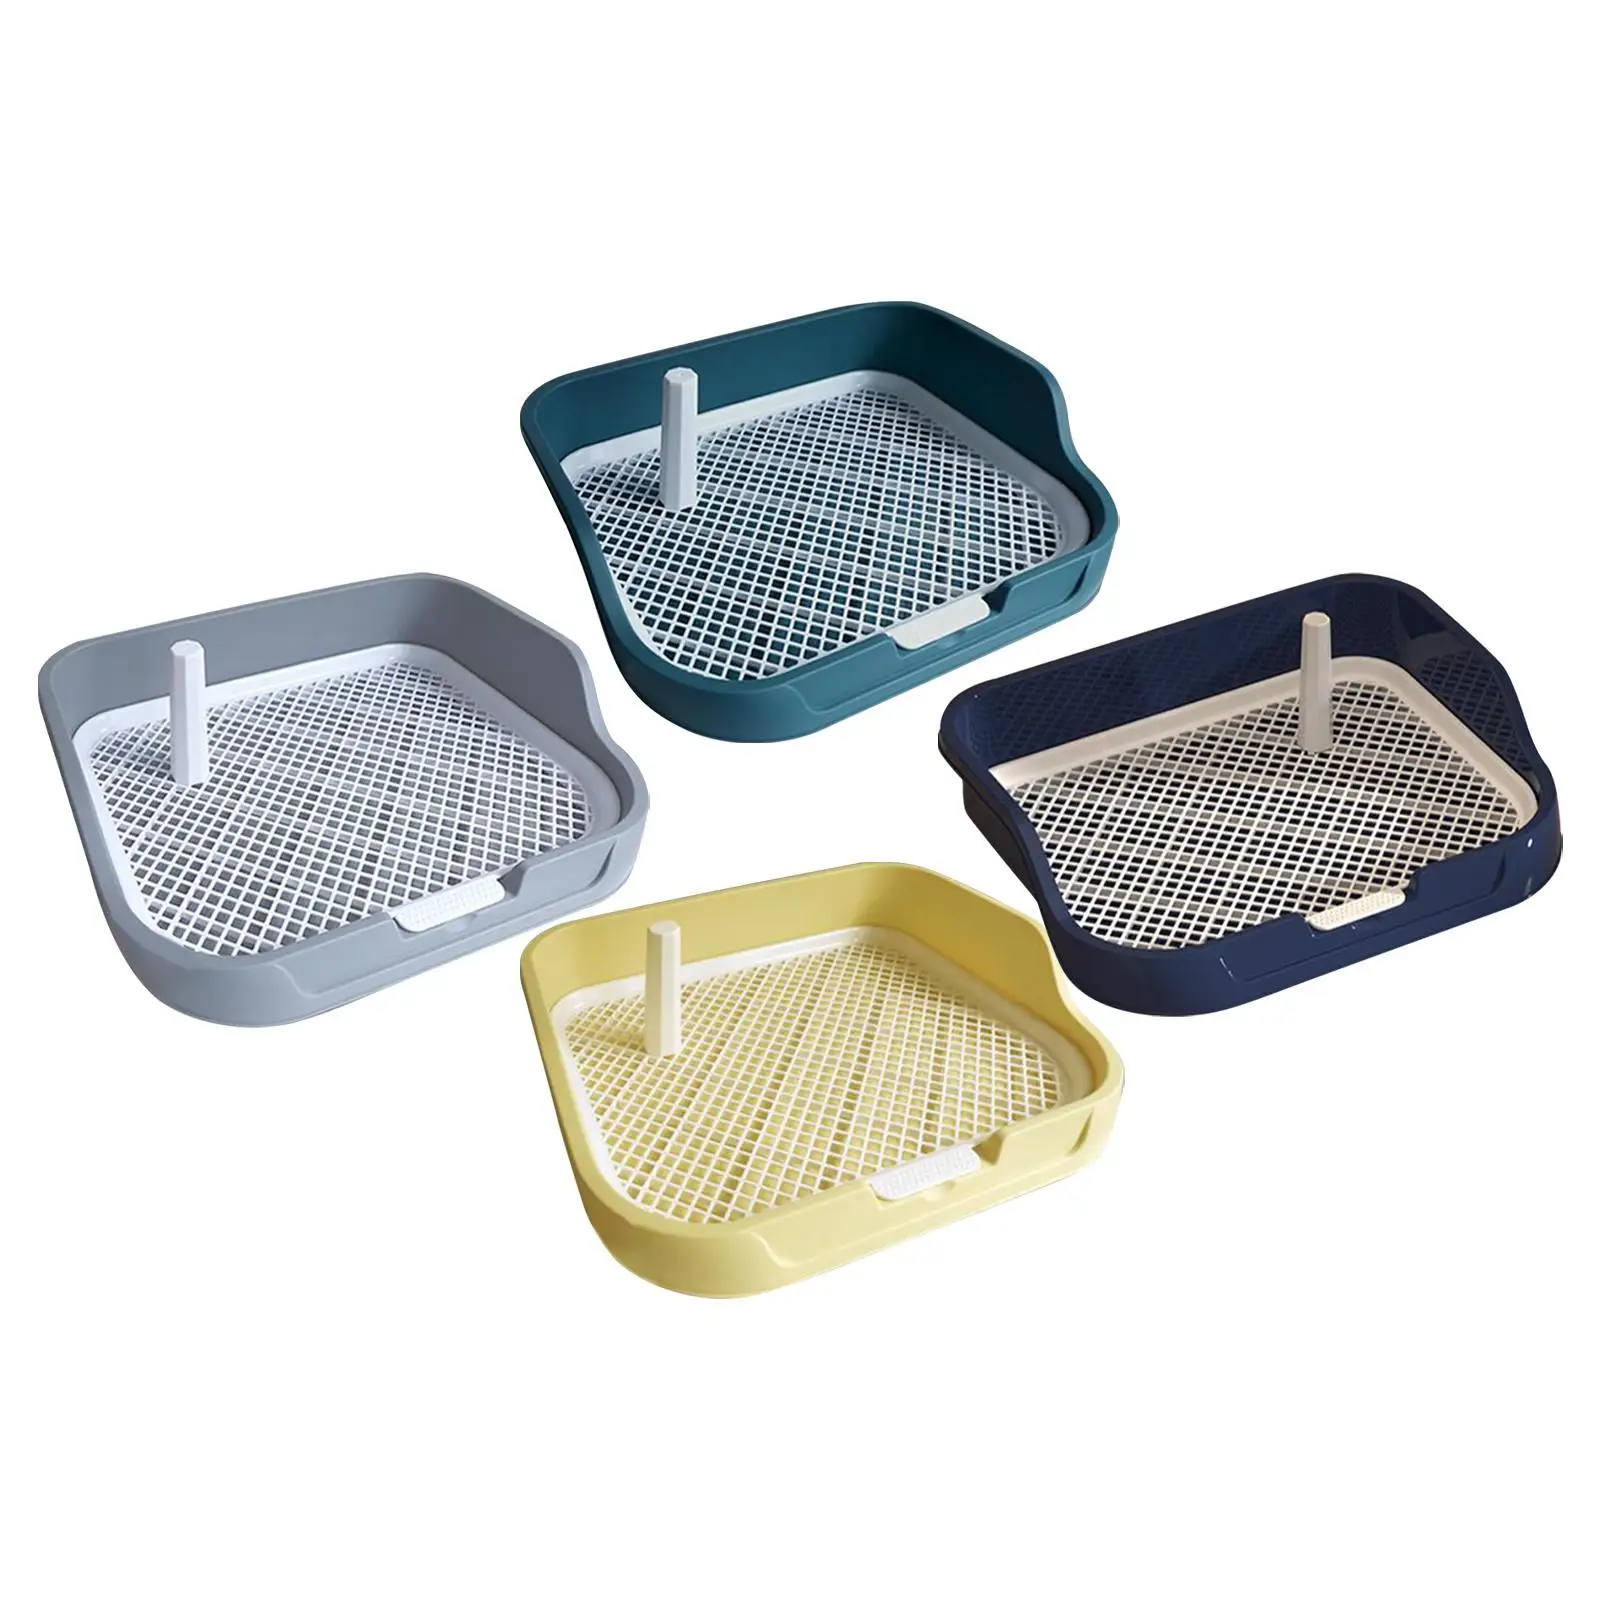 Mesh Grids Pet Training Toilet Reusable Durable Comfortable Dog Toilet for Puppy Bunny Cats Small and Medium Dogs Indoor